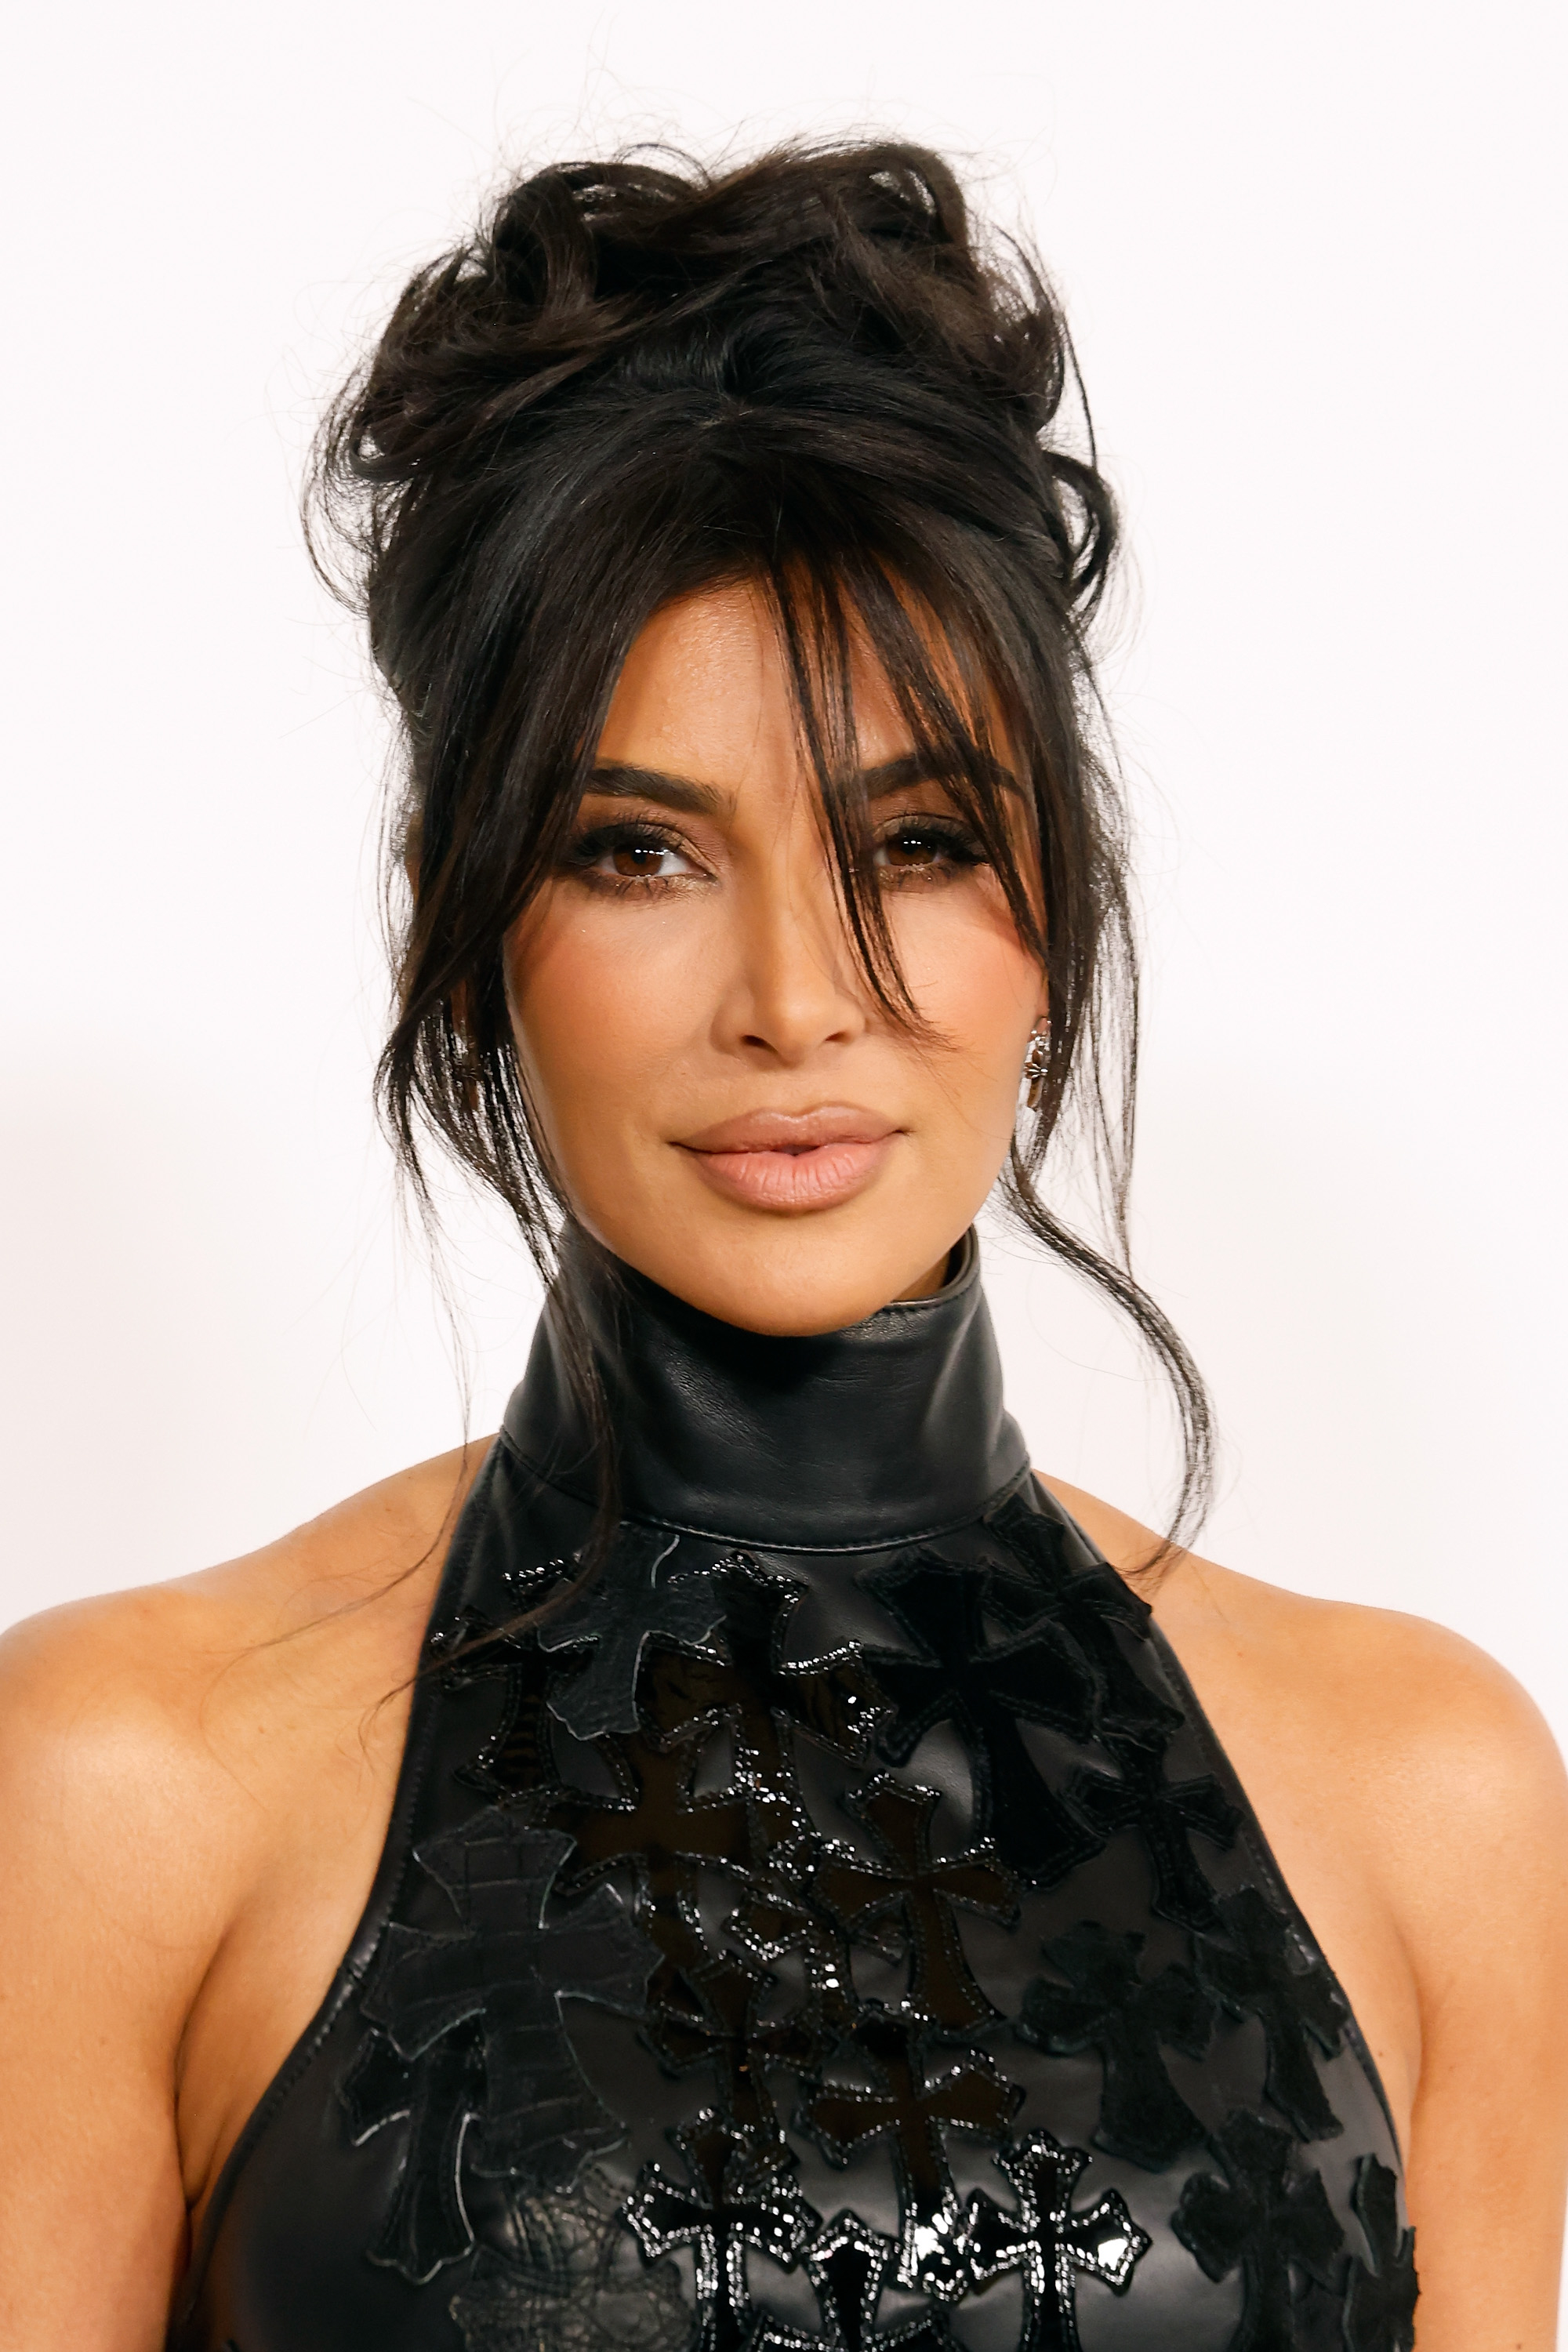 Close-up of Kim wearing a halter top